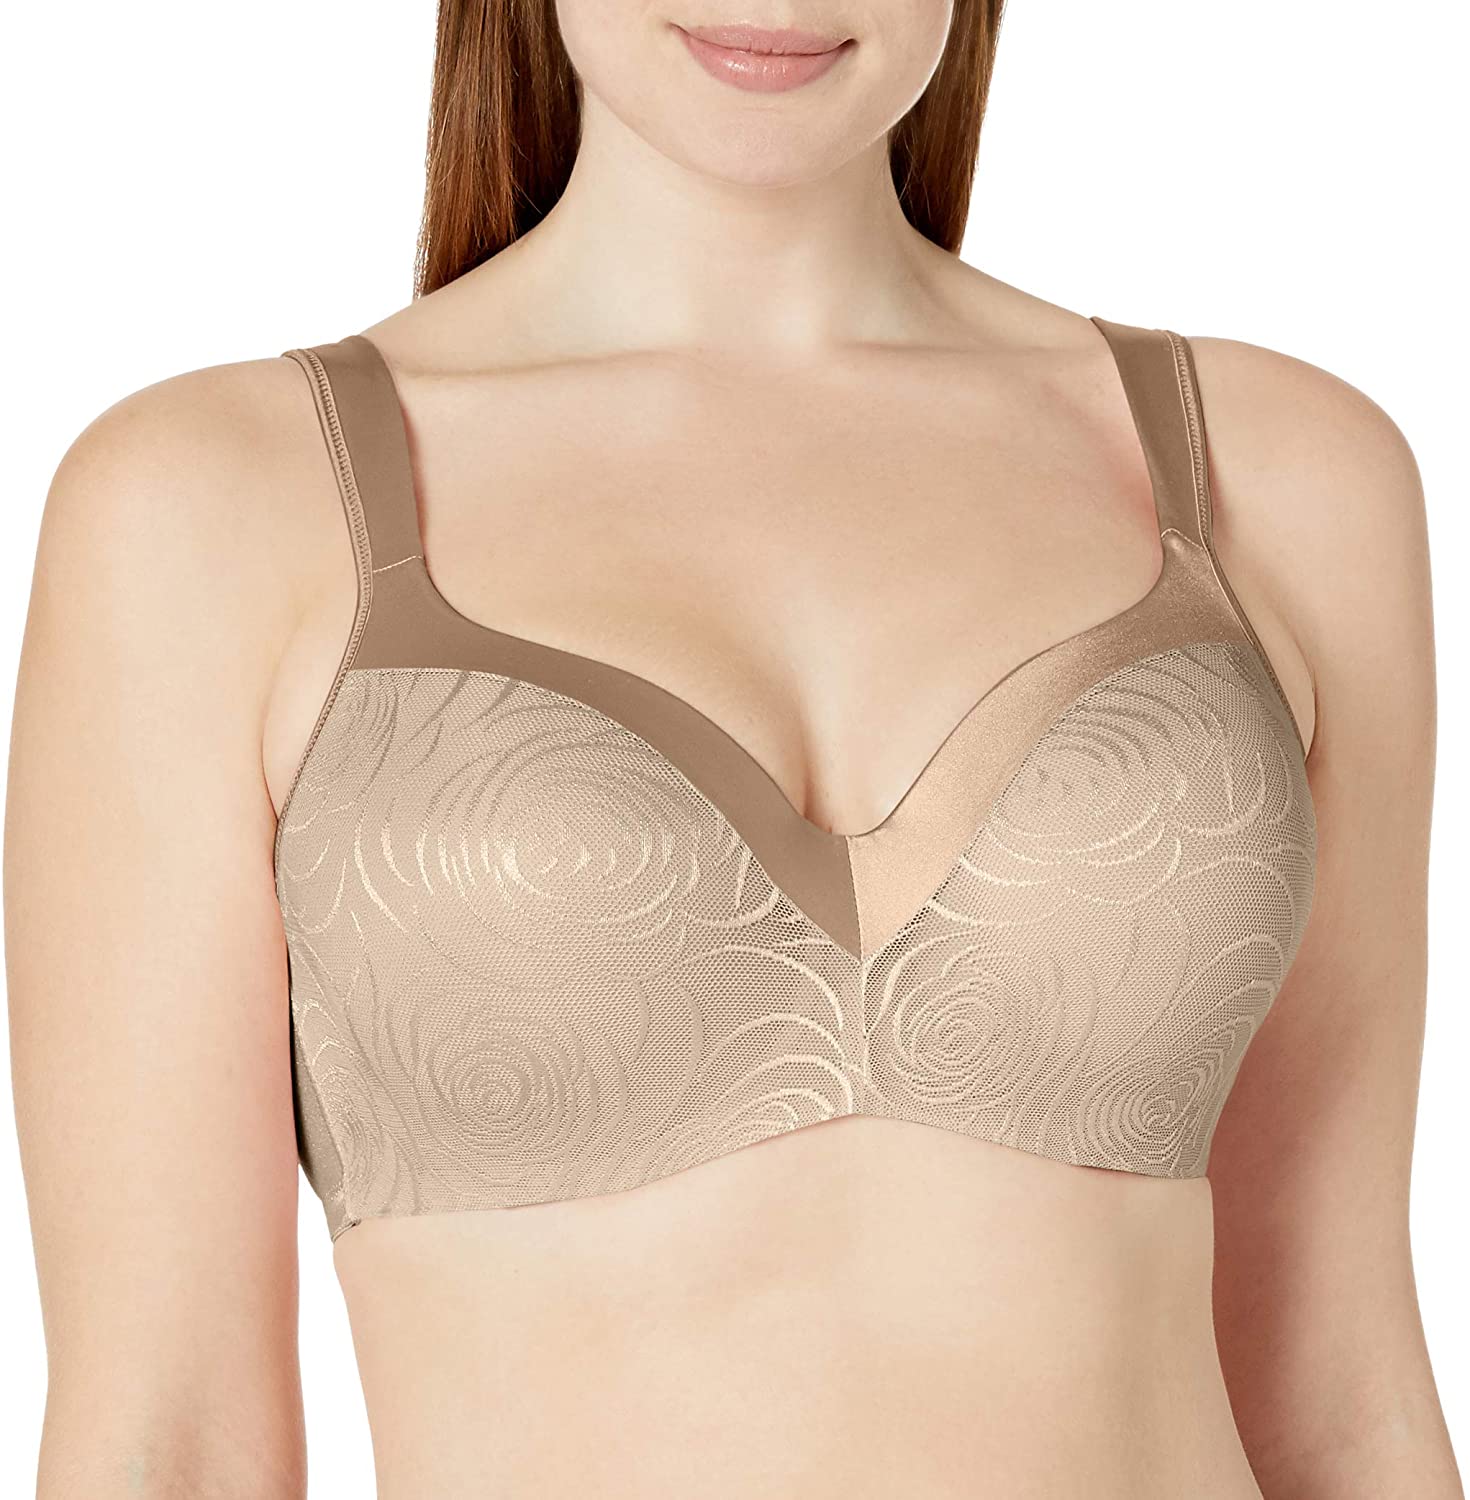 Playtex Love My Curves Shape Underwire Bra 4823 Size 46dd Black for sale  online